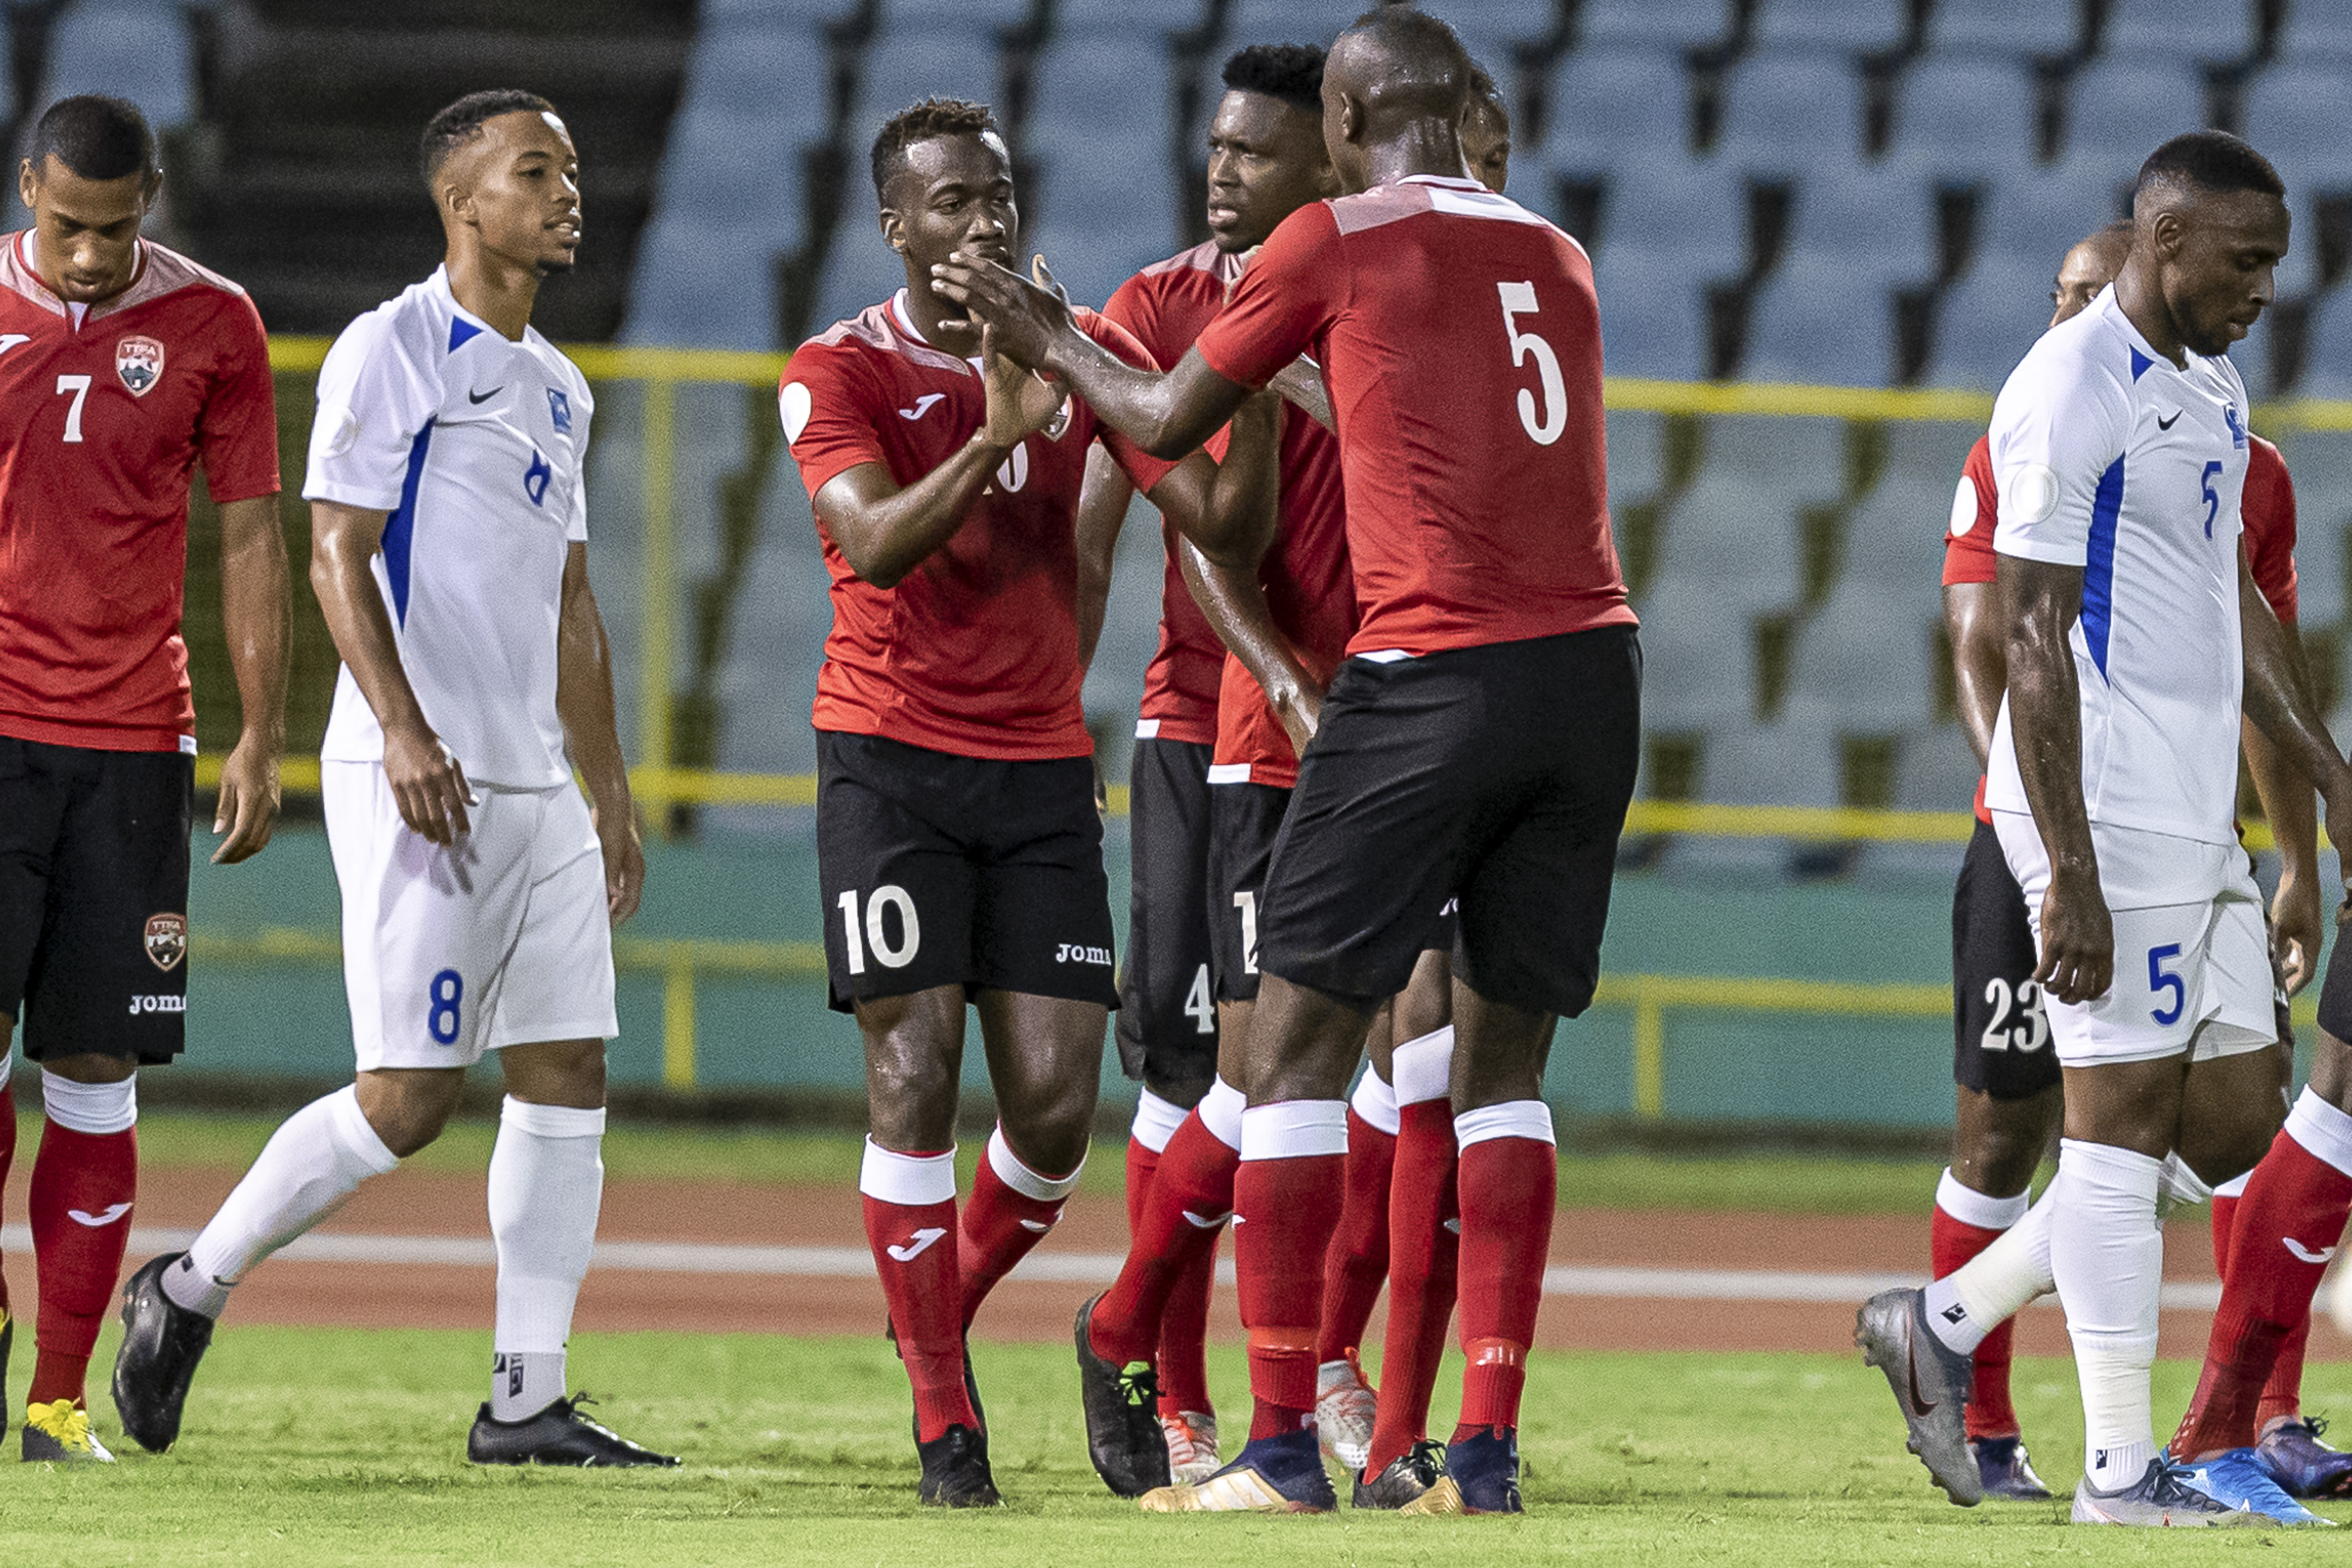 T&T play to 2-2 draw with Martinique in Nations League clash.